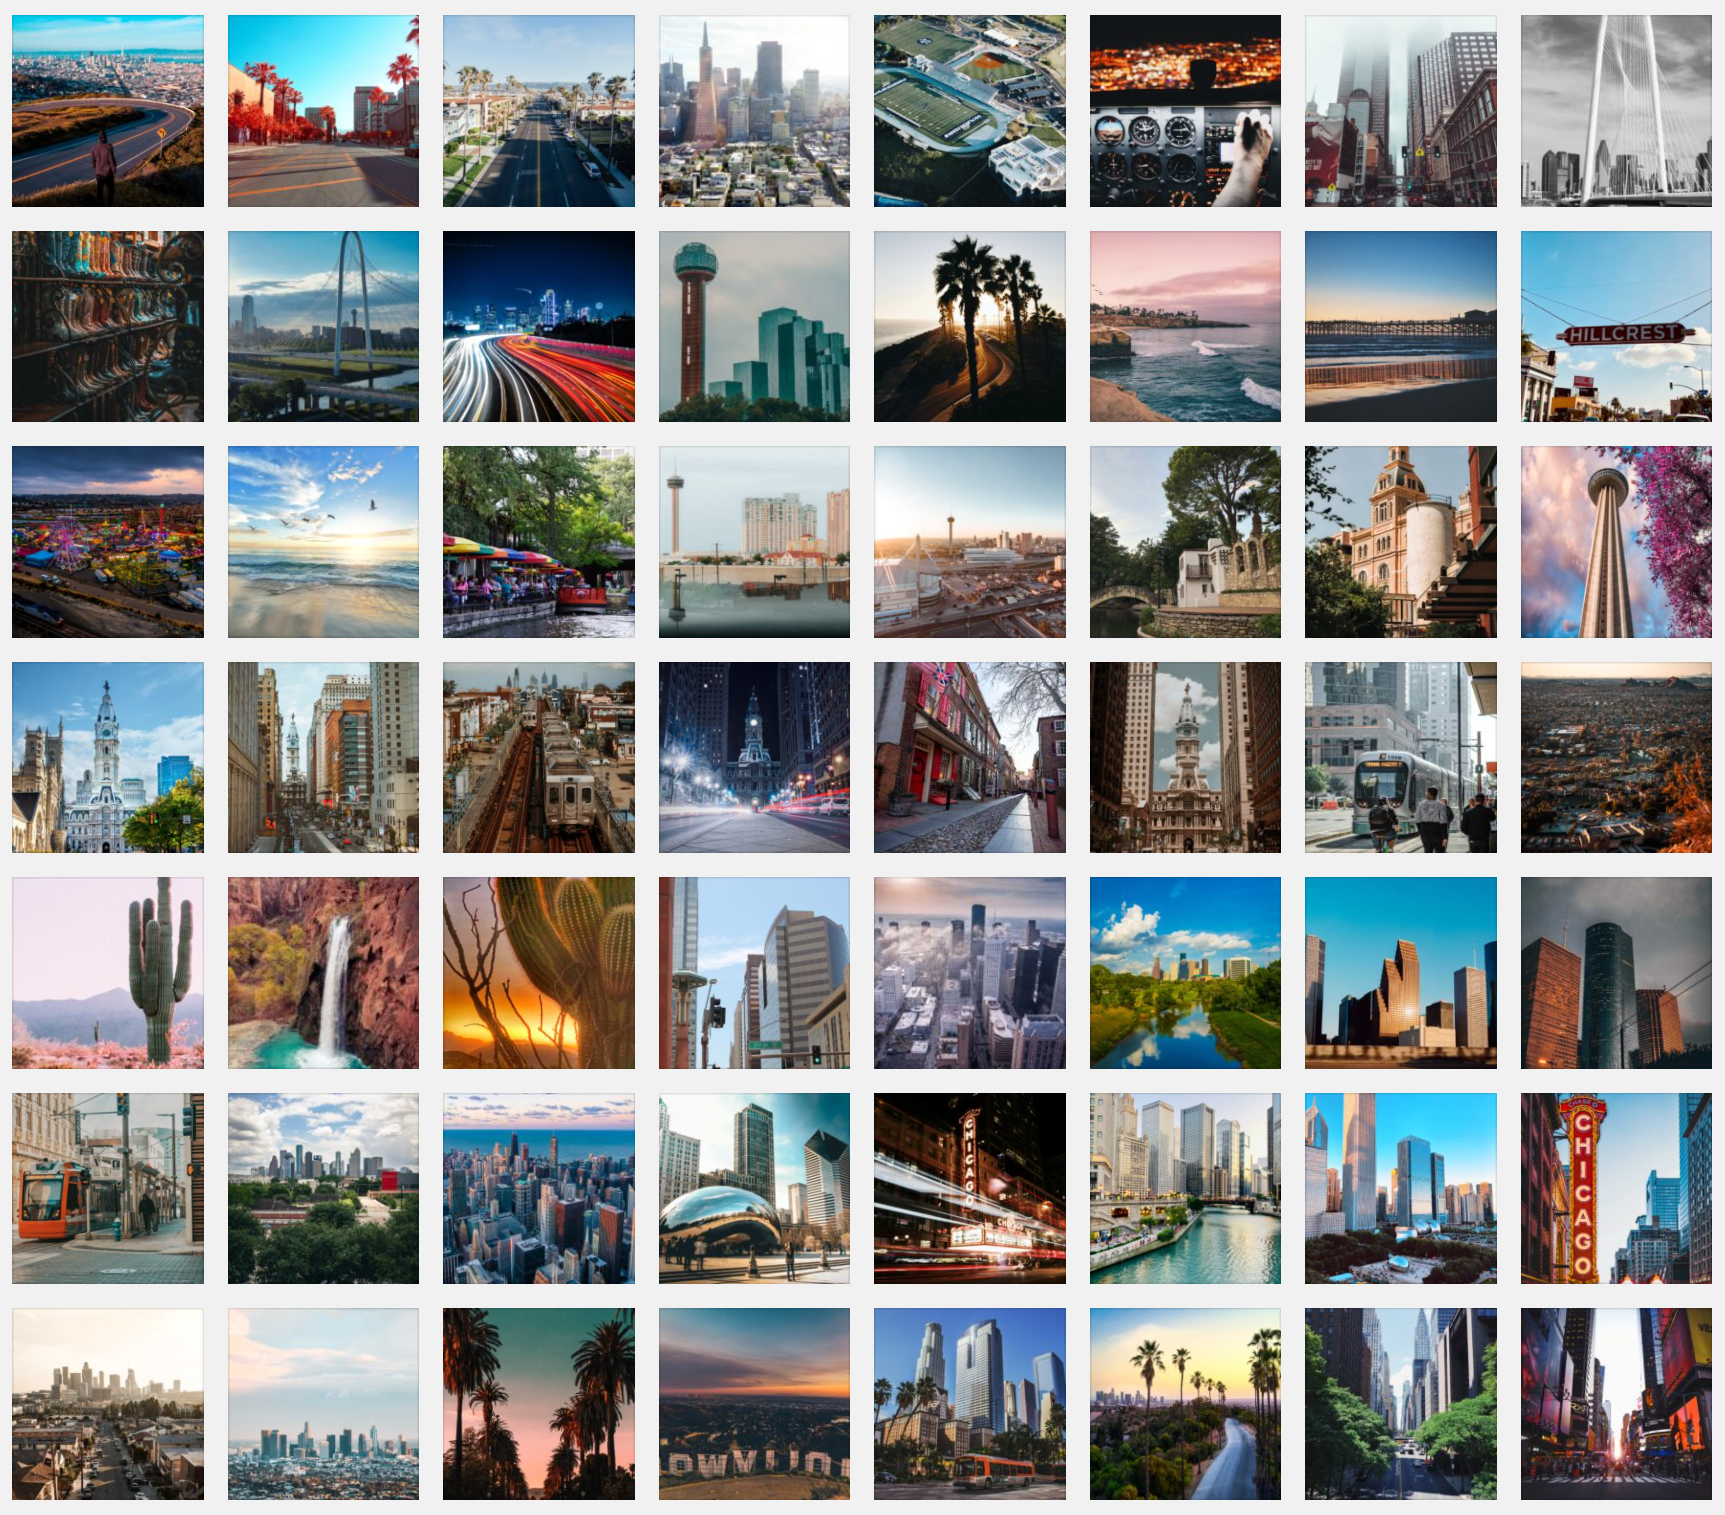 These are the 10 most beautiful American cities to set as your Teams background